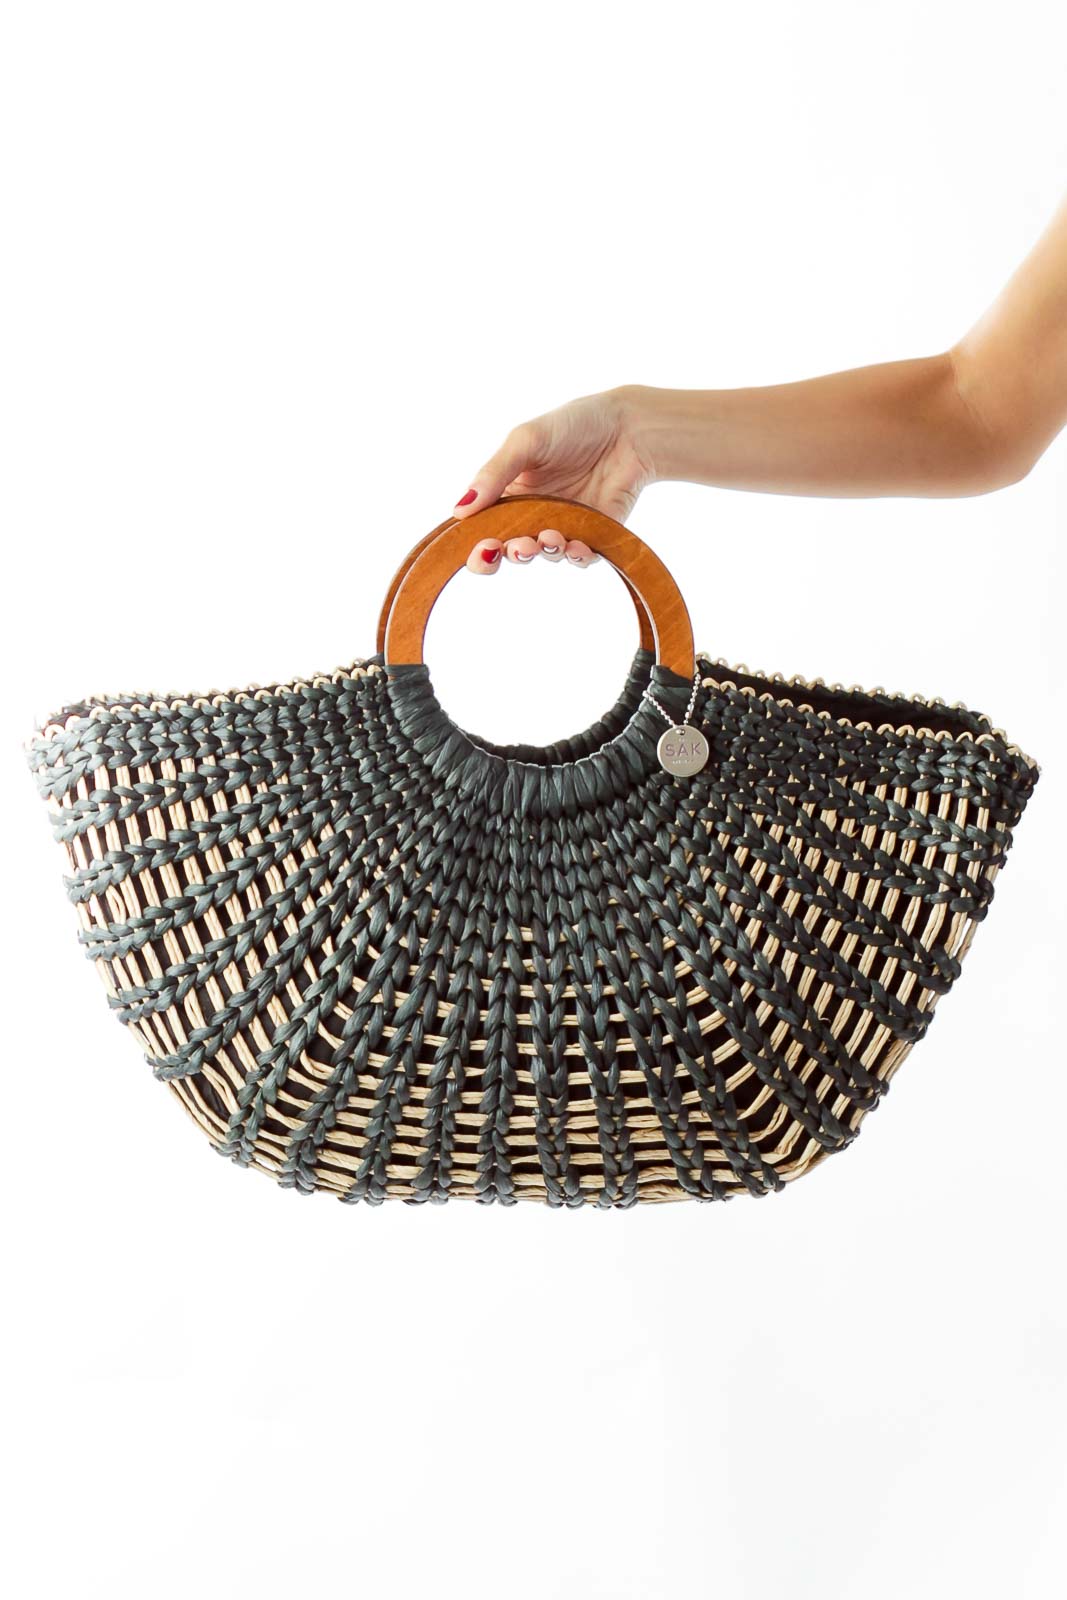 Black & Beige Woven Tote Front